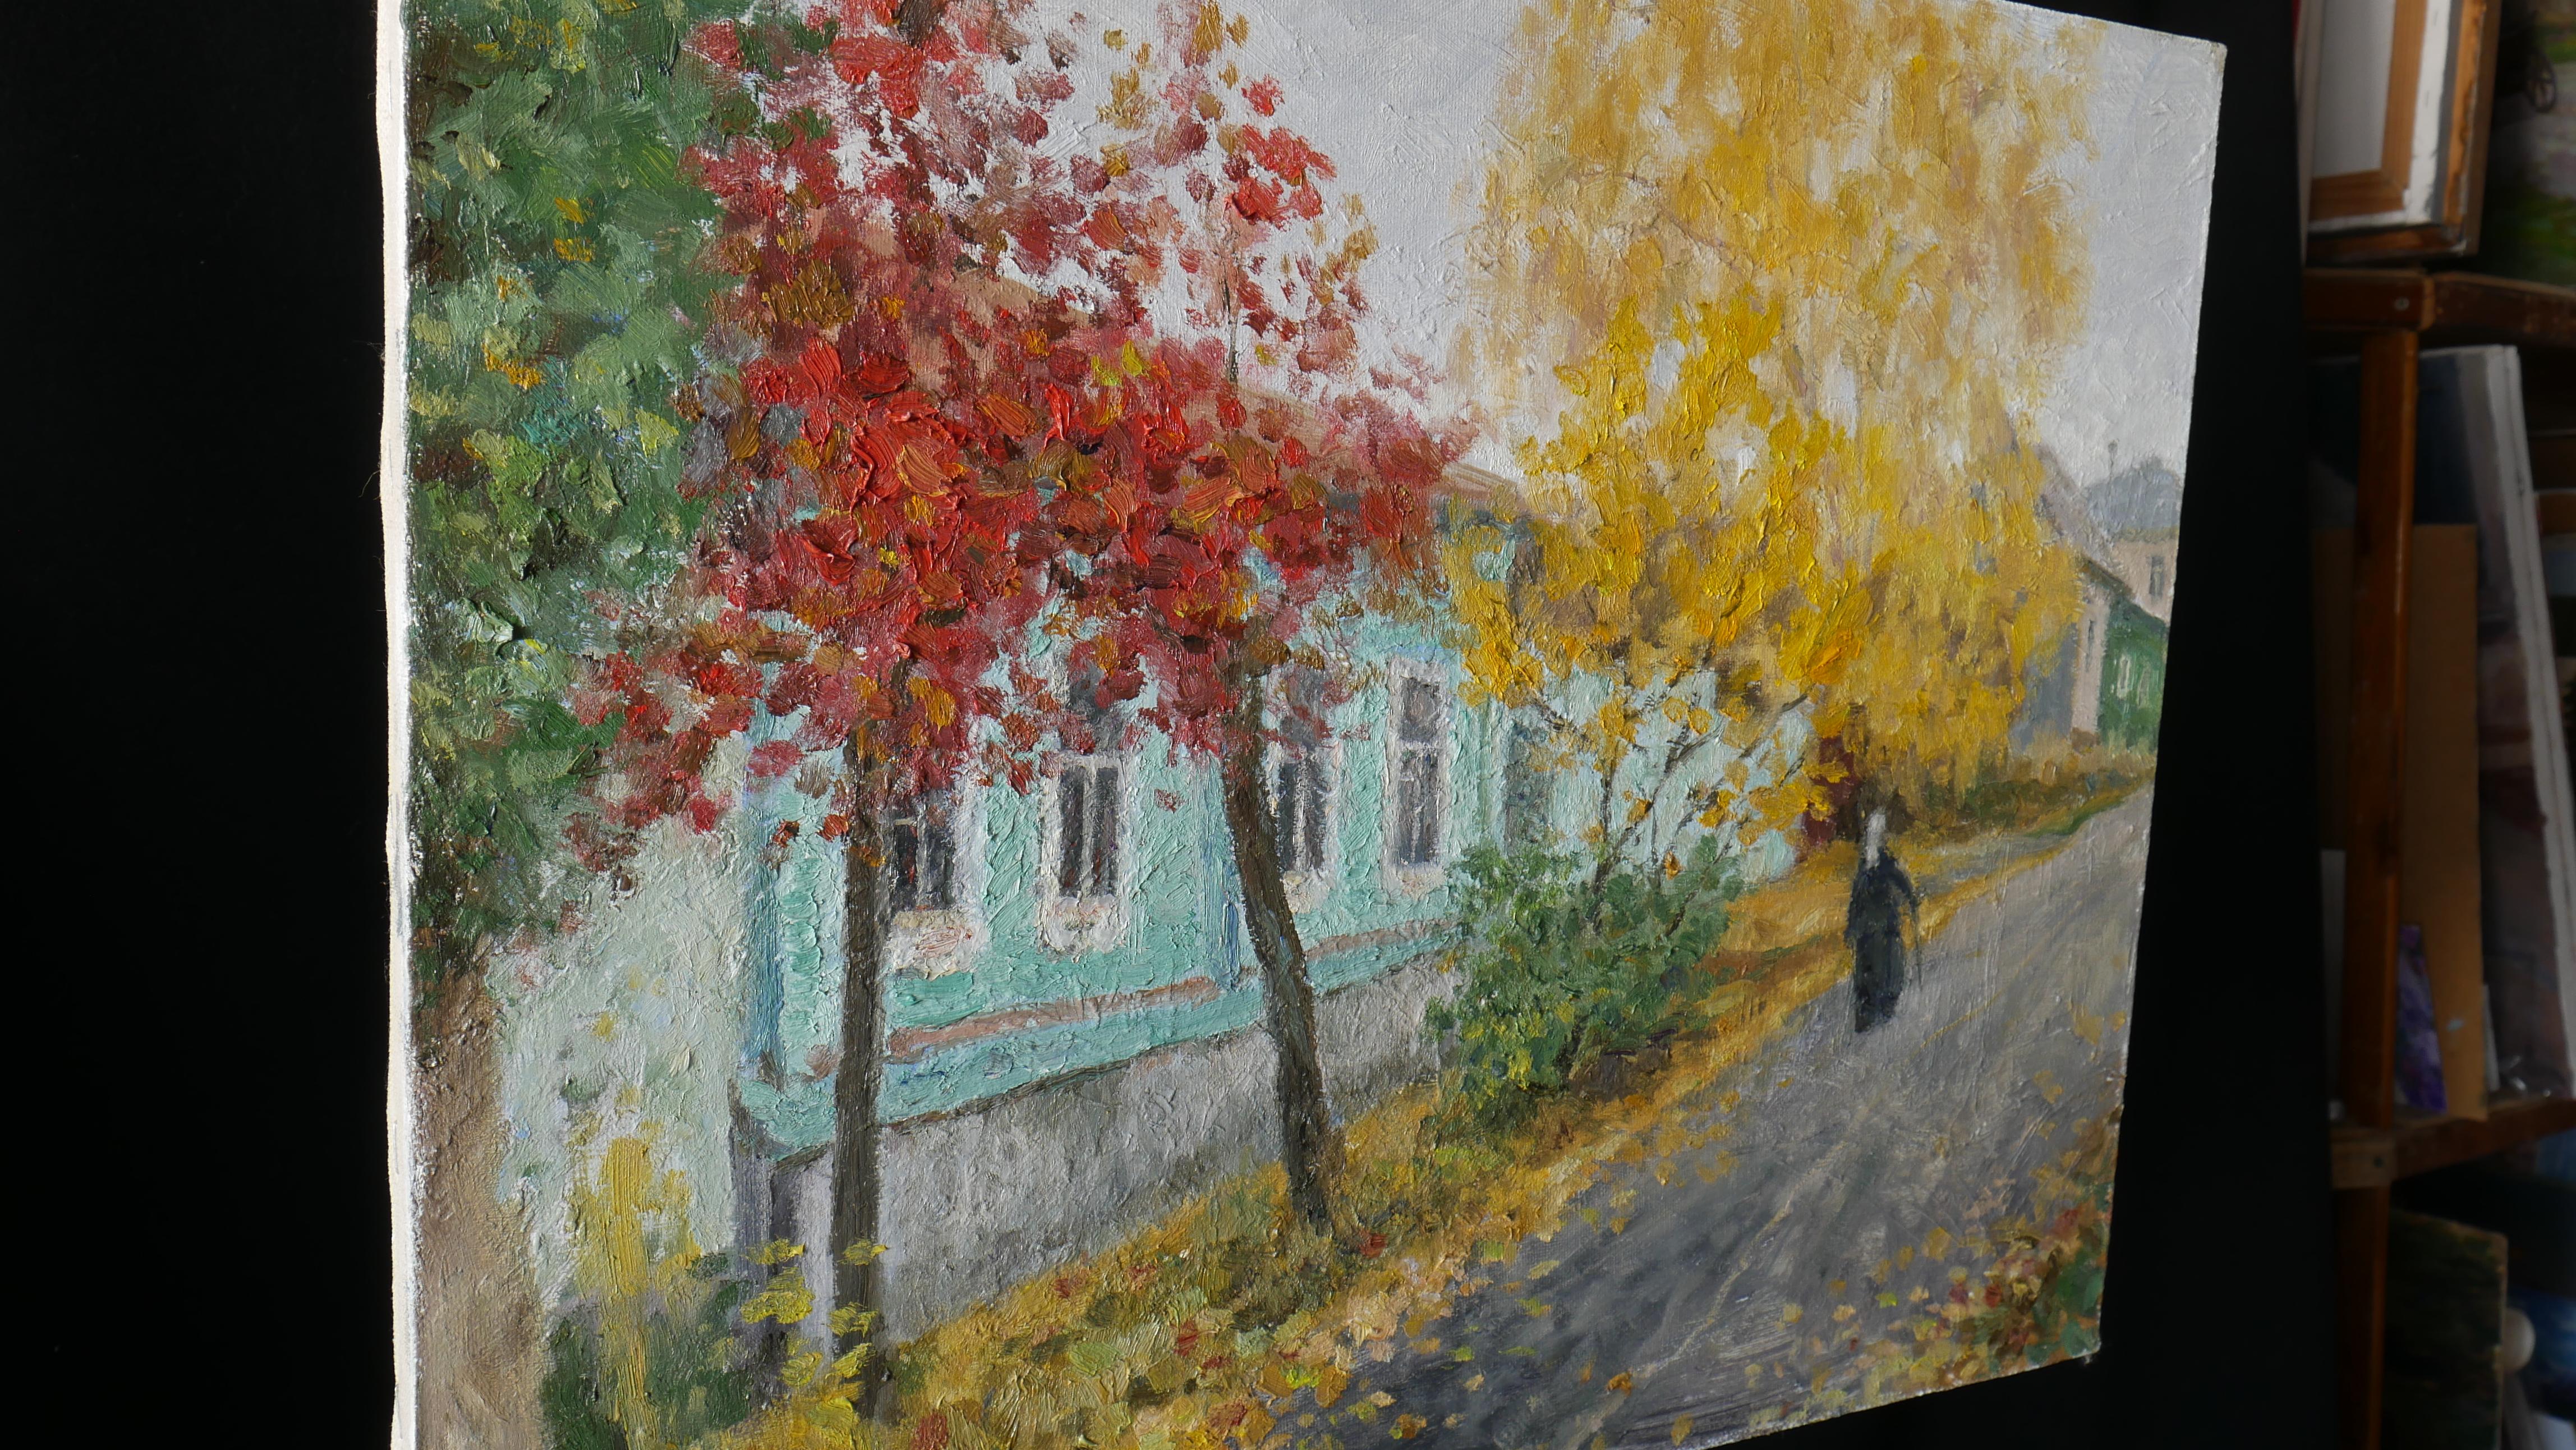 Autumn In Yelets - autumn cityscape painting - Impressionist Painting by Nikolay Dmitriev